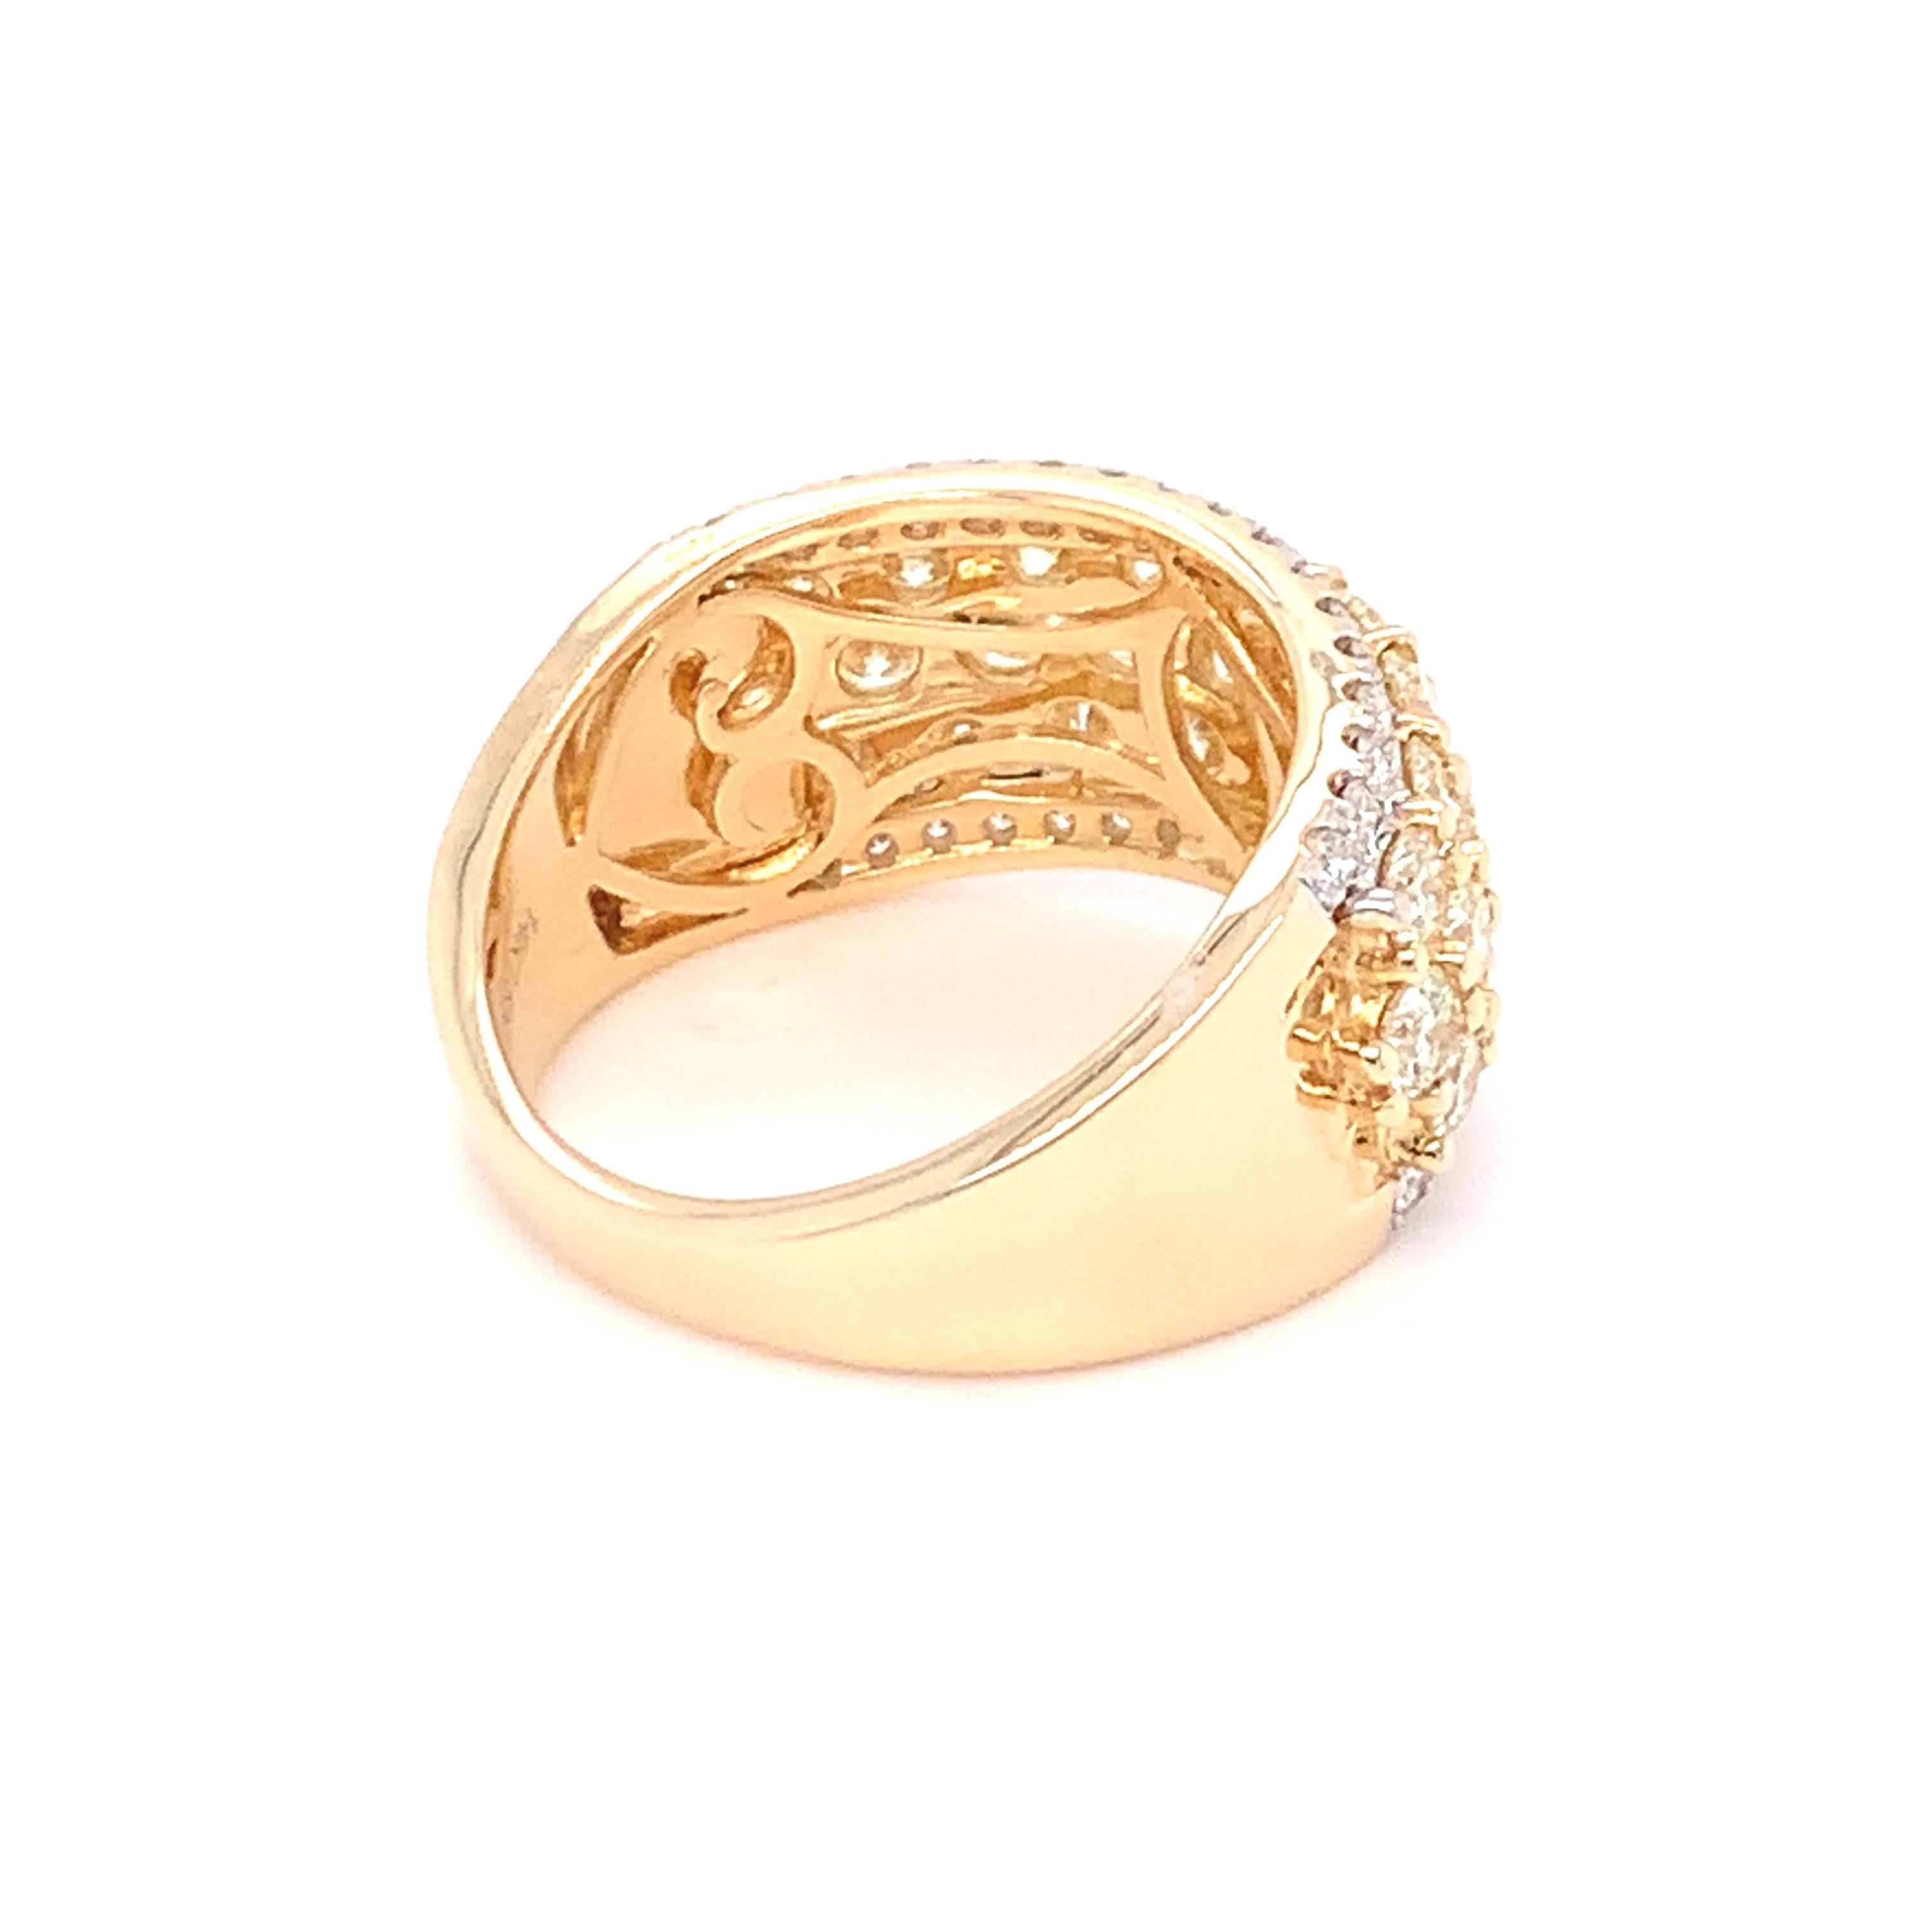 2.50 Carat Yellow & White Diamond Band Ring in 14k Yellow Gold For Sale 7